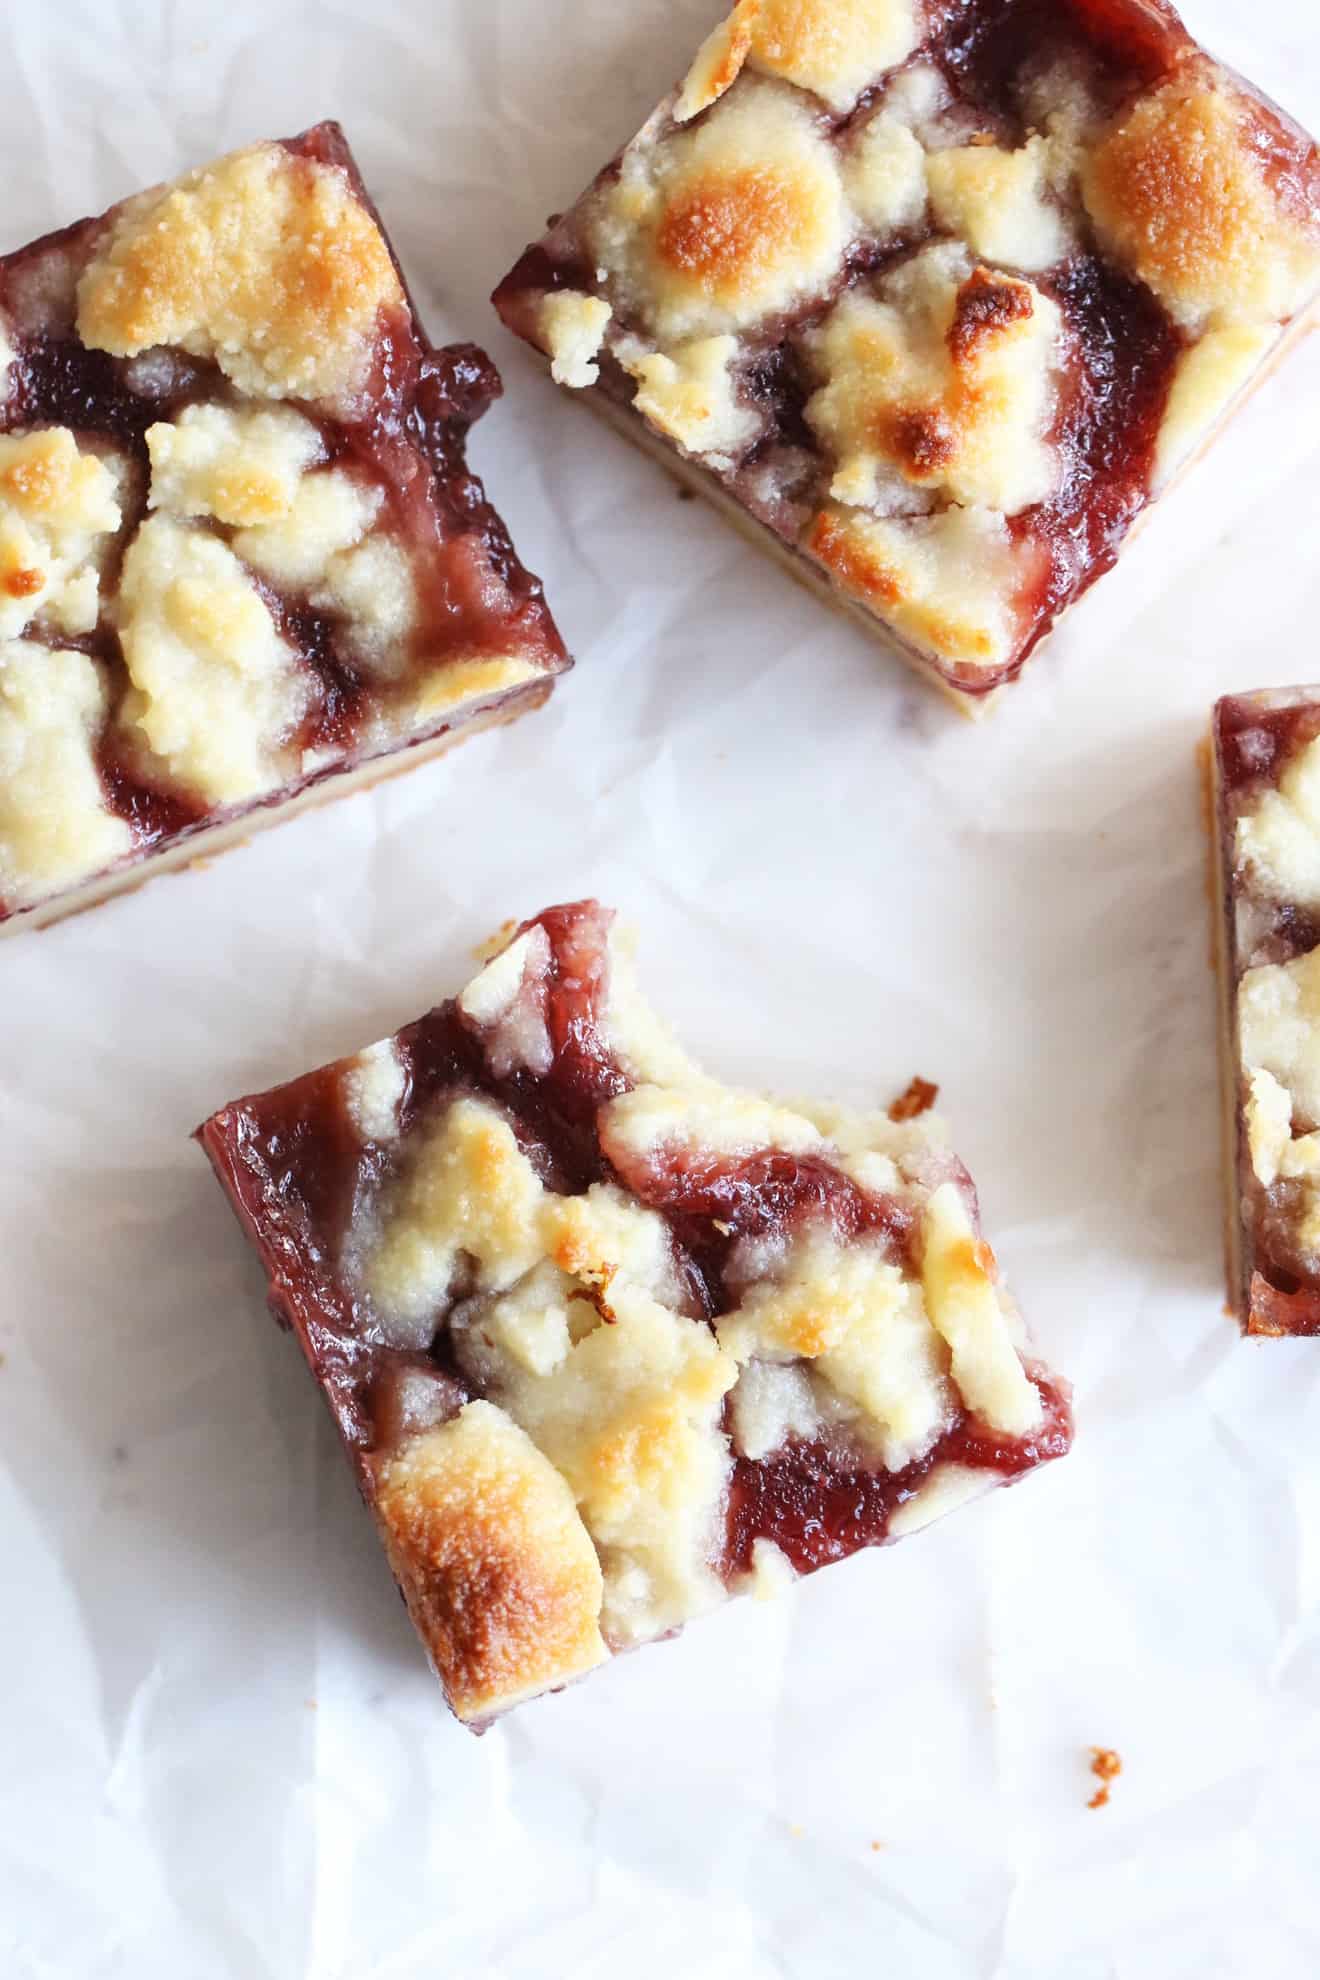 This is an overhead image of strawberry crumble bars. The bars sit on a white piece of parchment paper and one has a bite taken out of it.